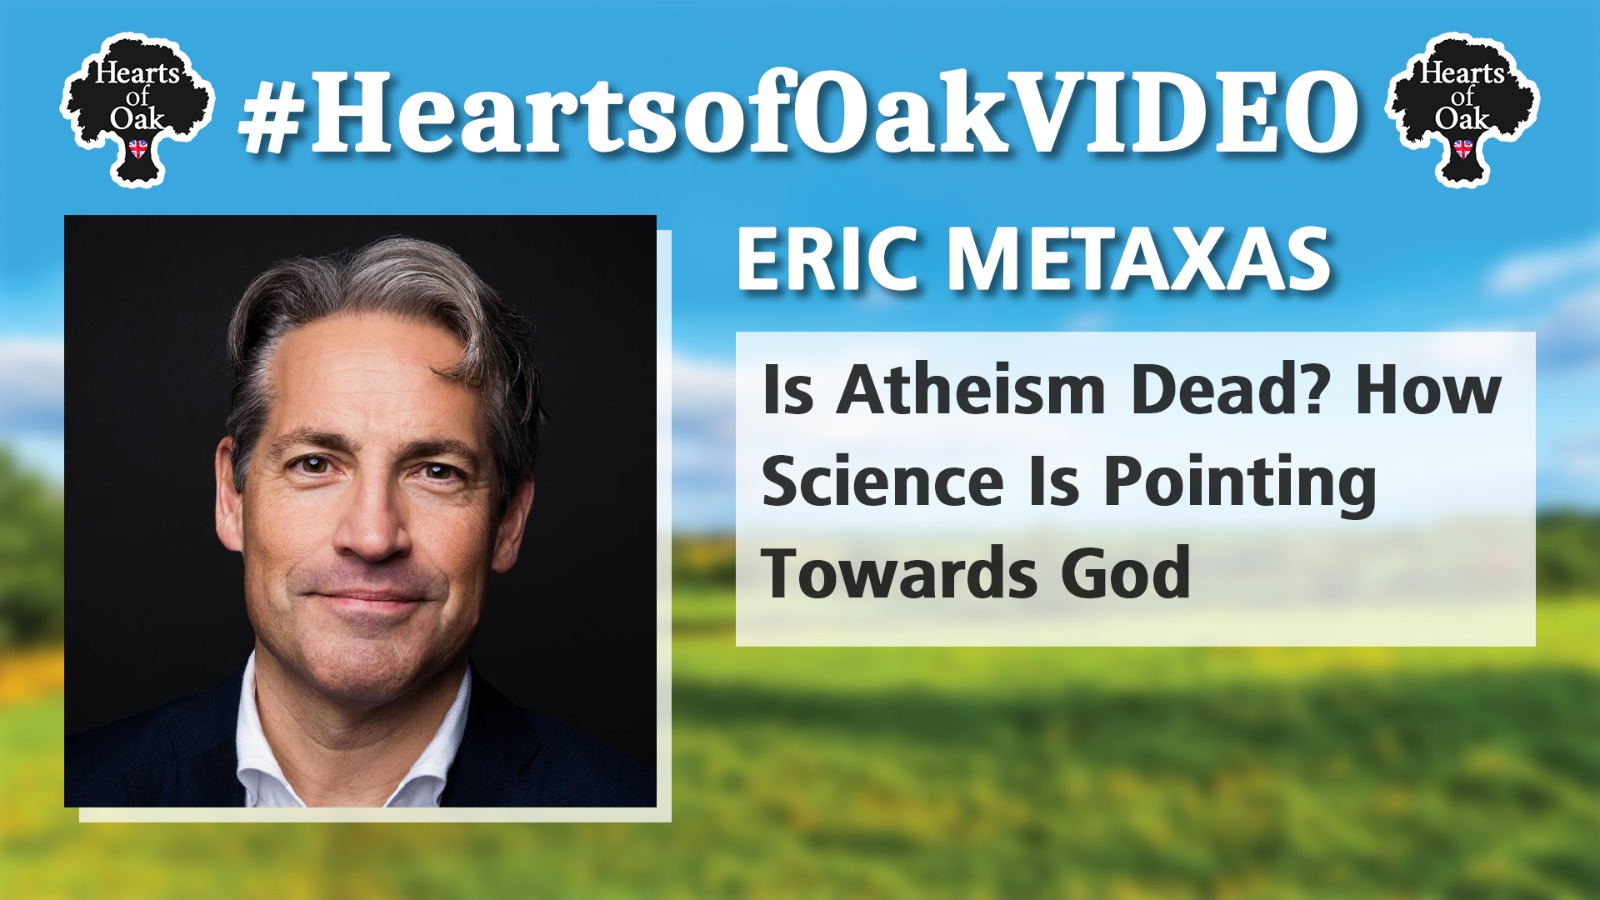 Eric Metaxas - Is Atheism Dead? How Science is Pointing Towards God